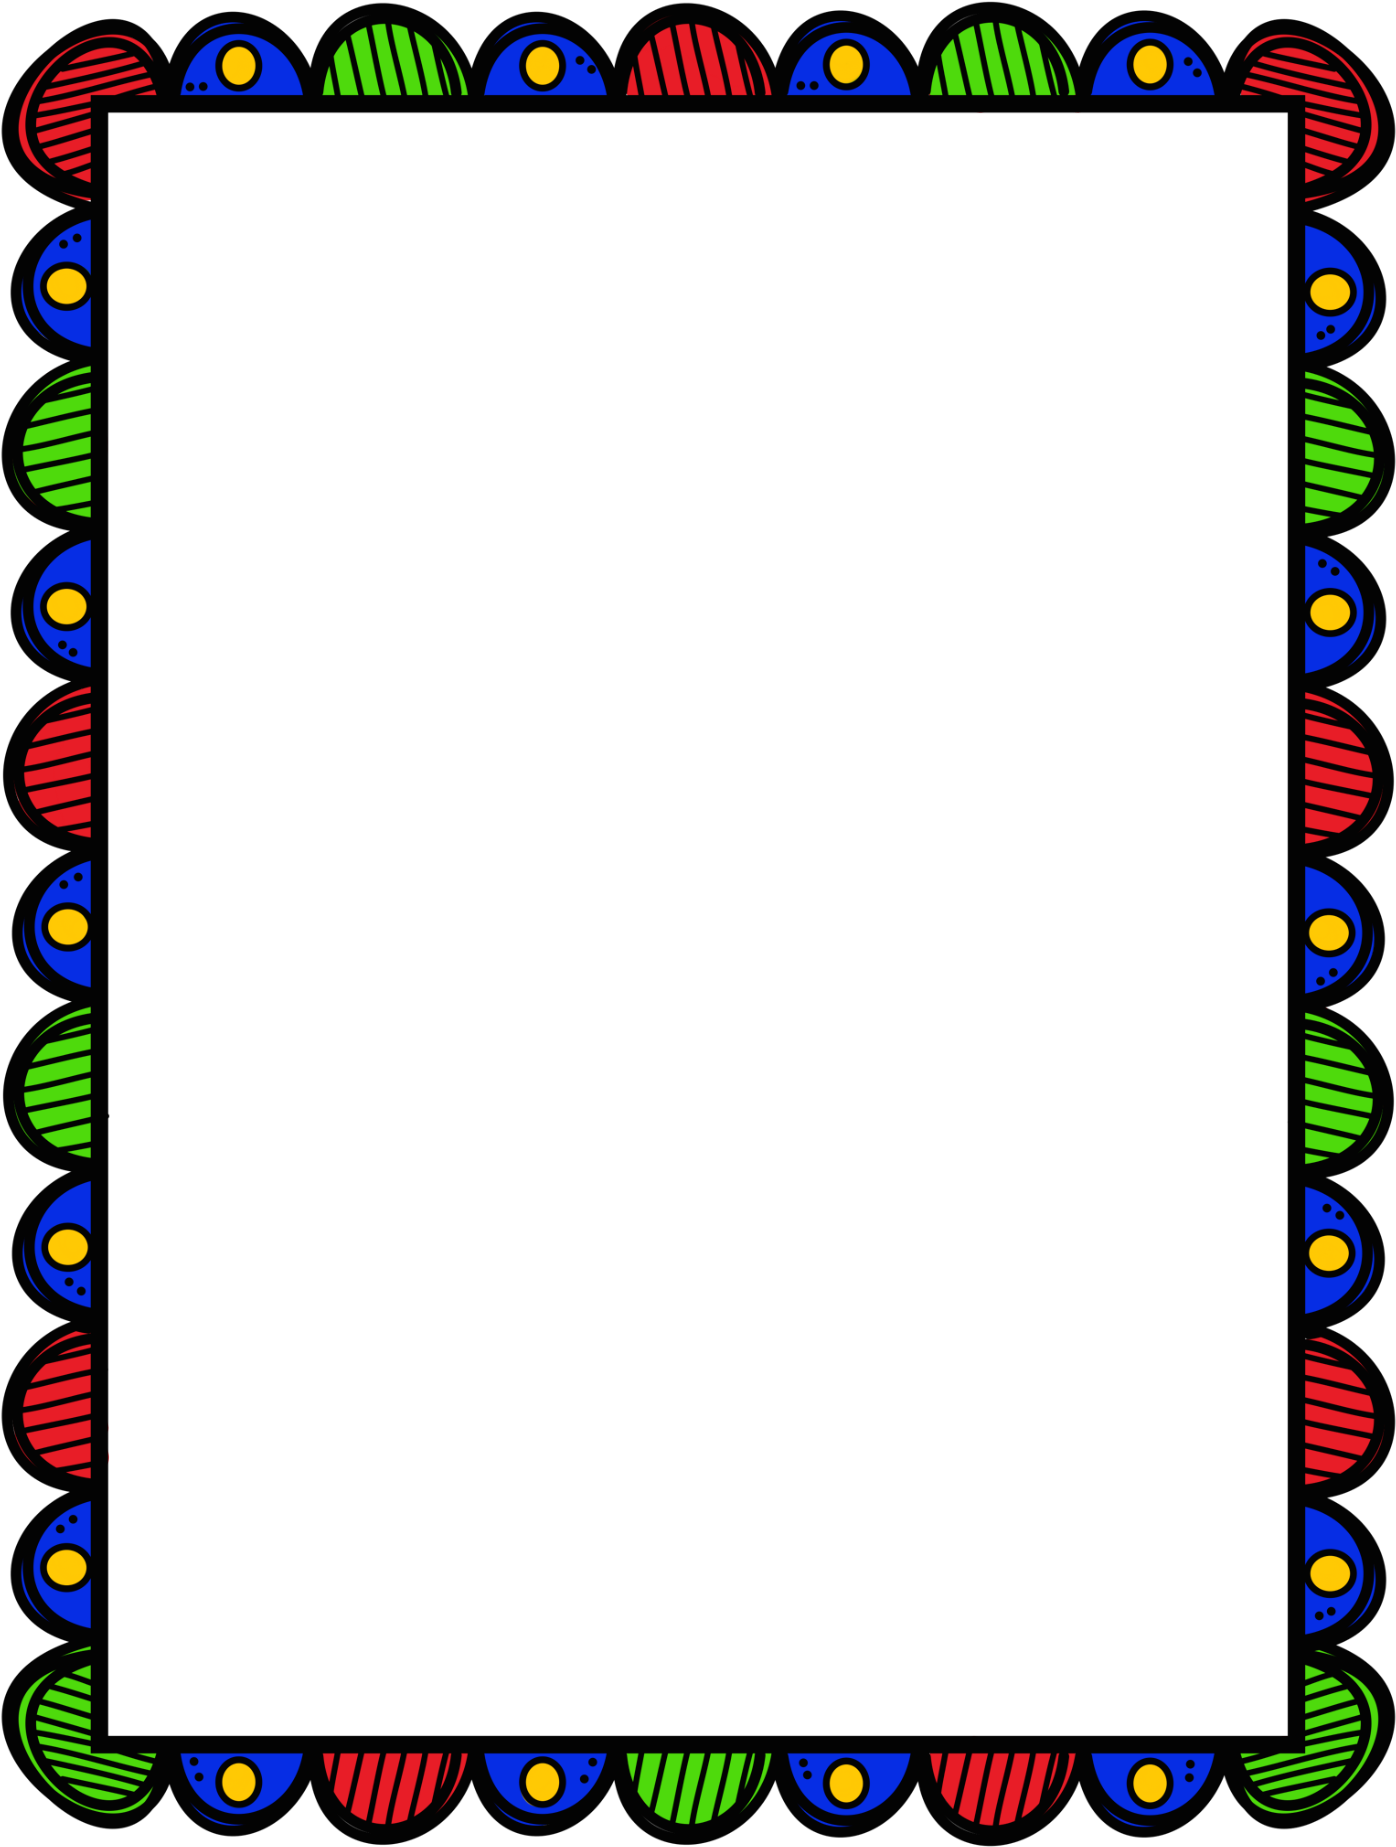 Colorful Peacock Feather Border Design PNG image